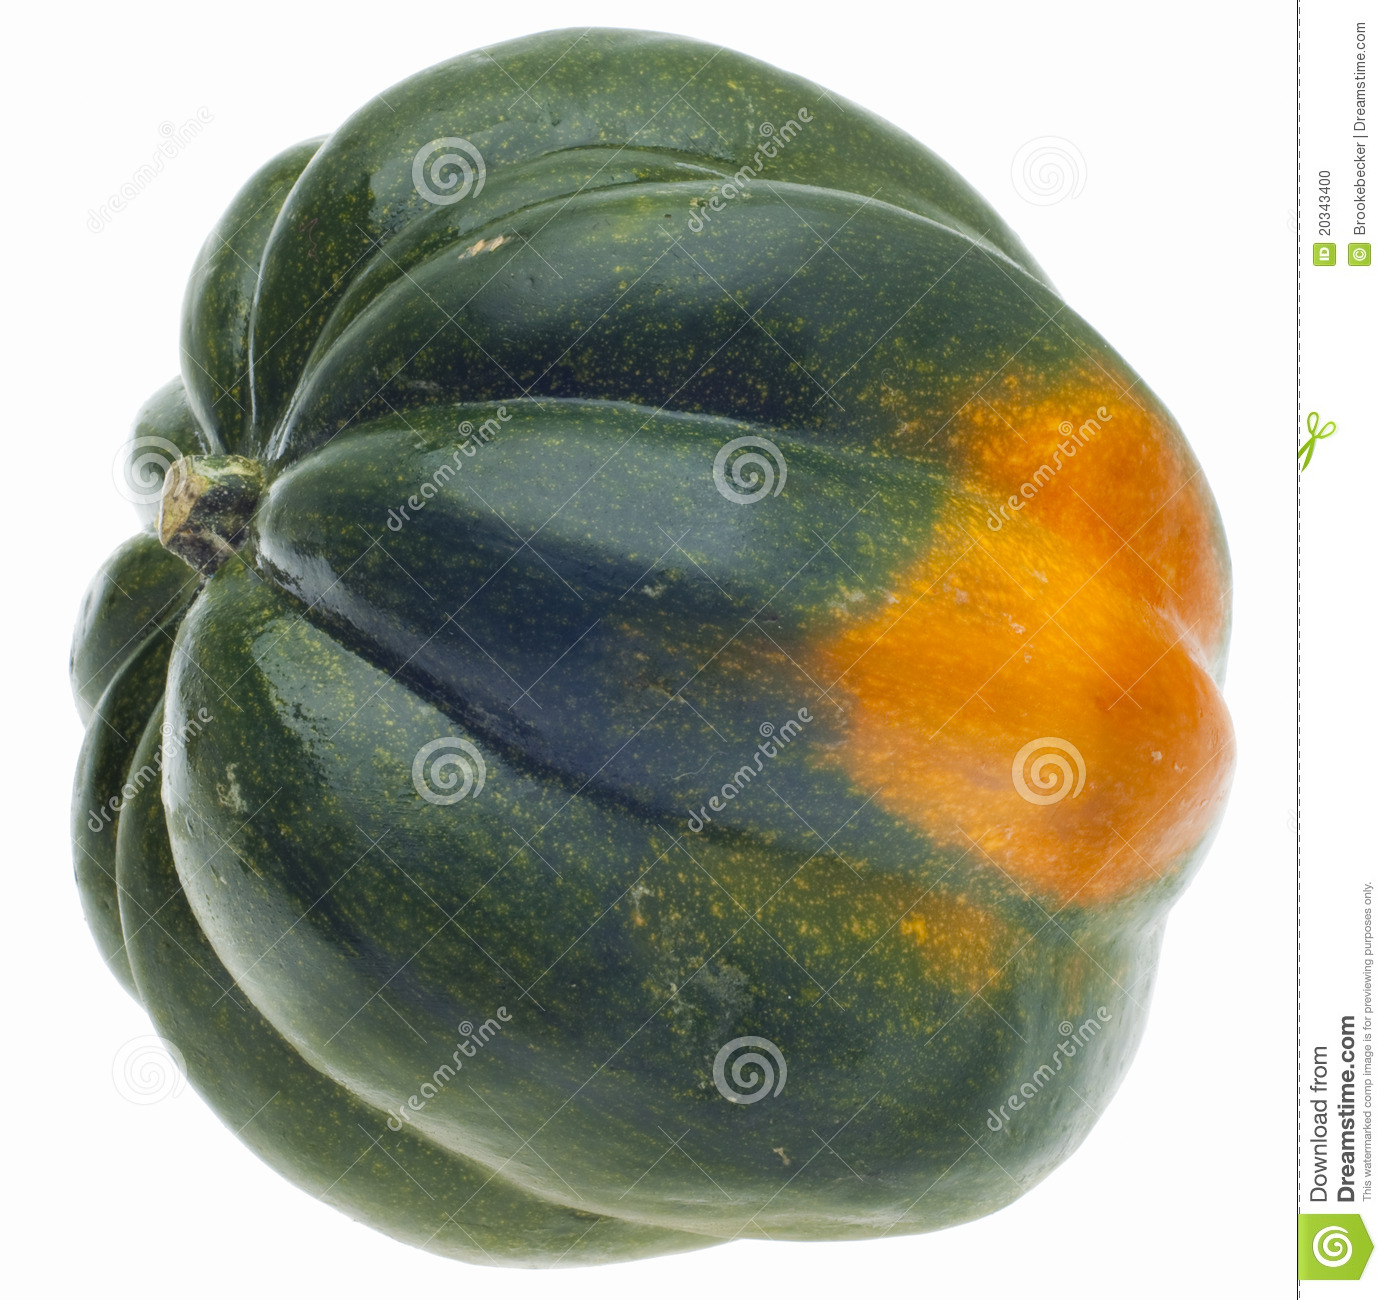 Acorn Squash Isolated On White With A Clipping Path